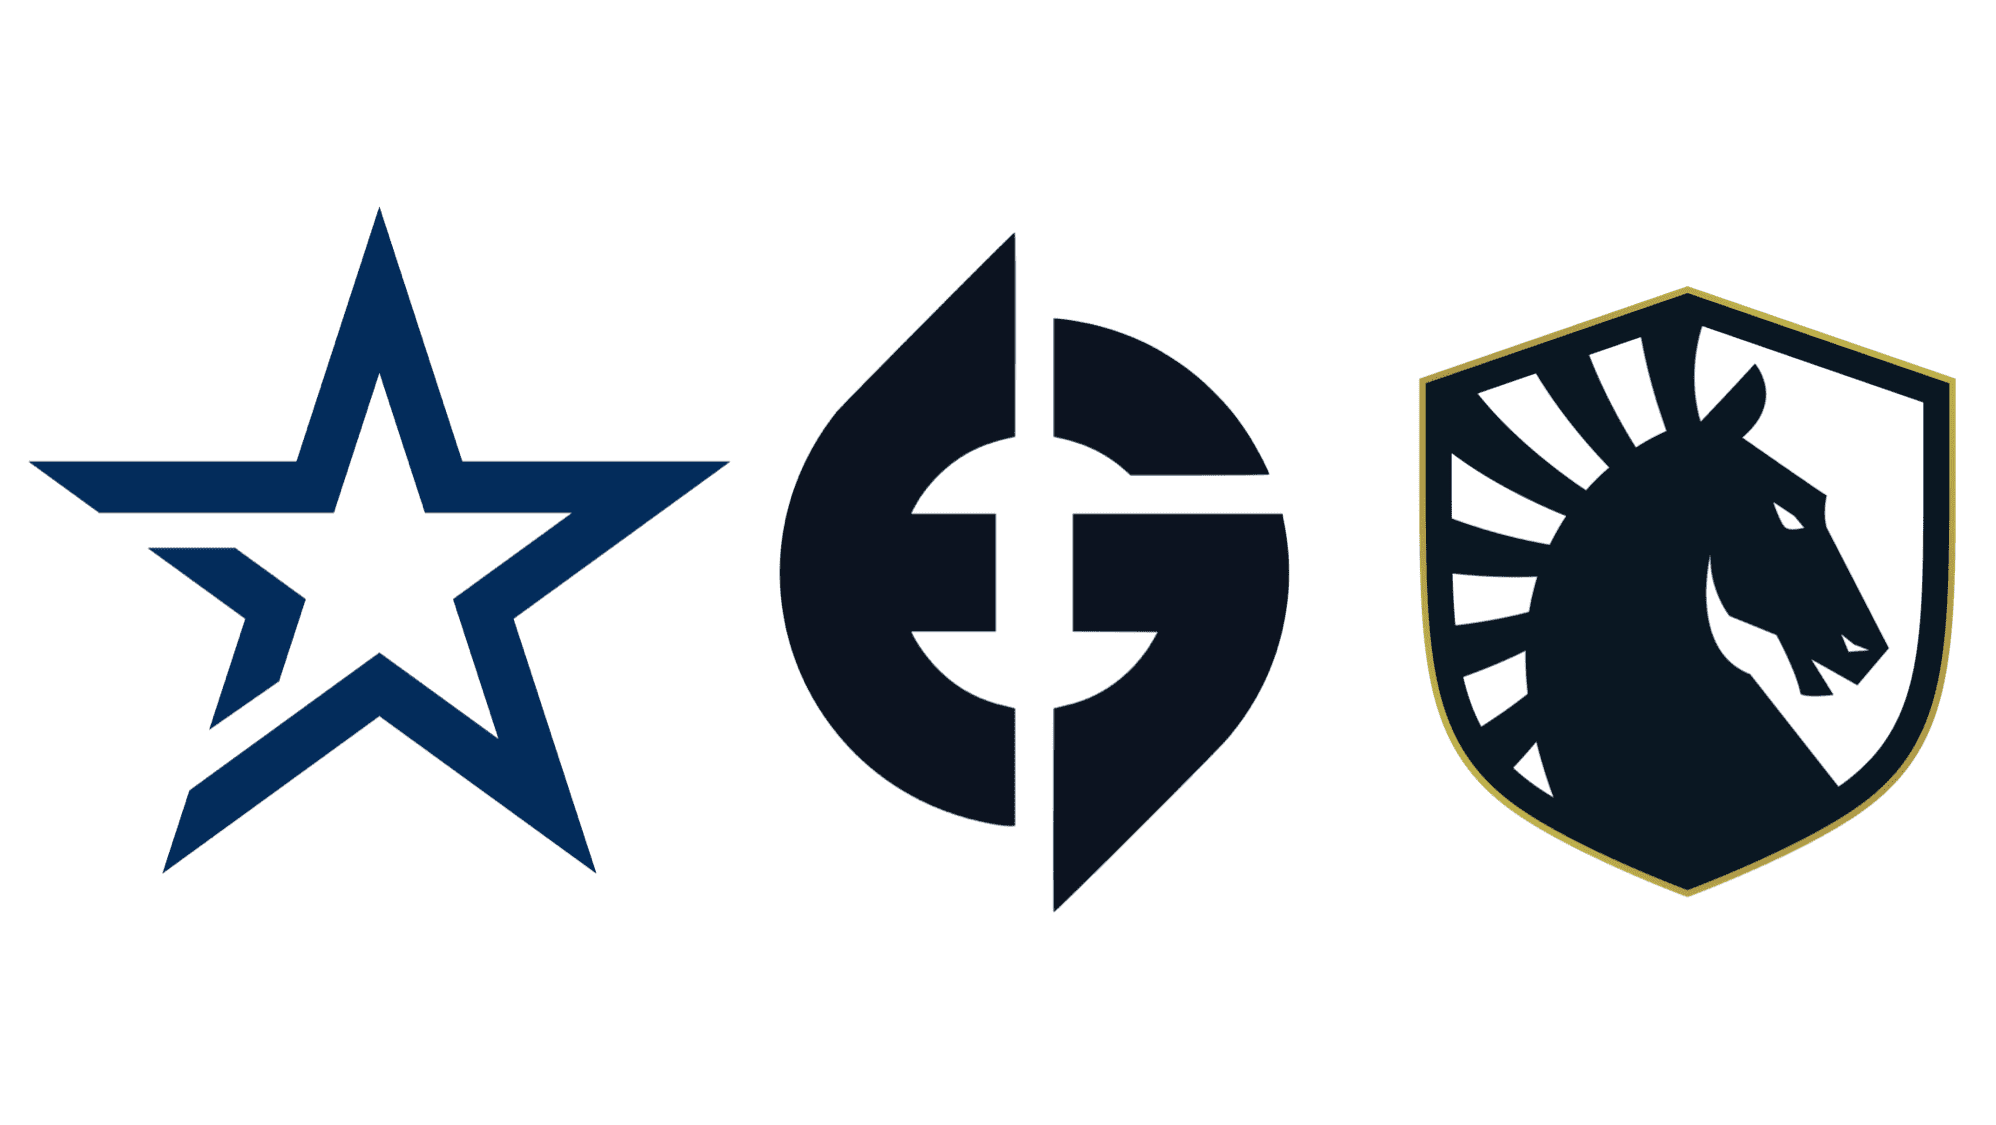 Liquid, EG and Complexity make up the big three NA CS:GO teams. These are their logos